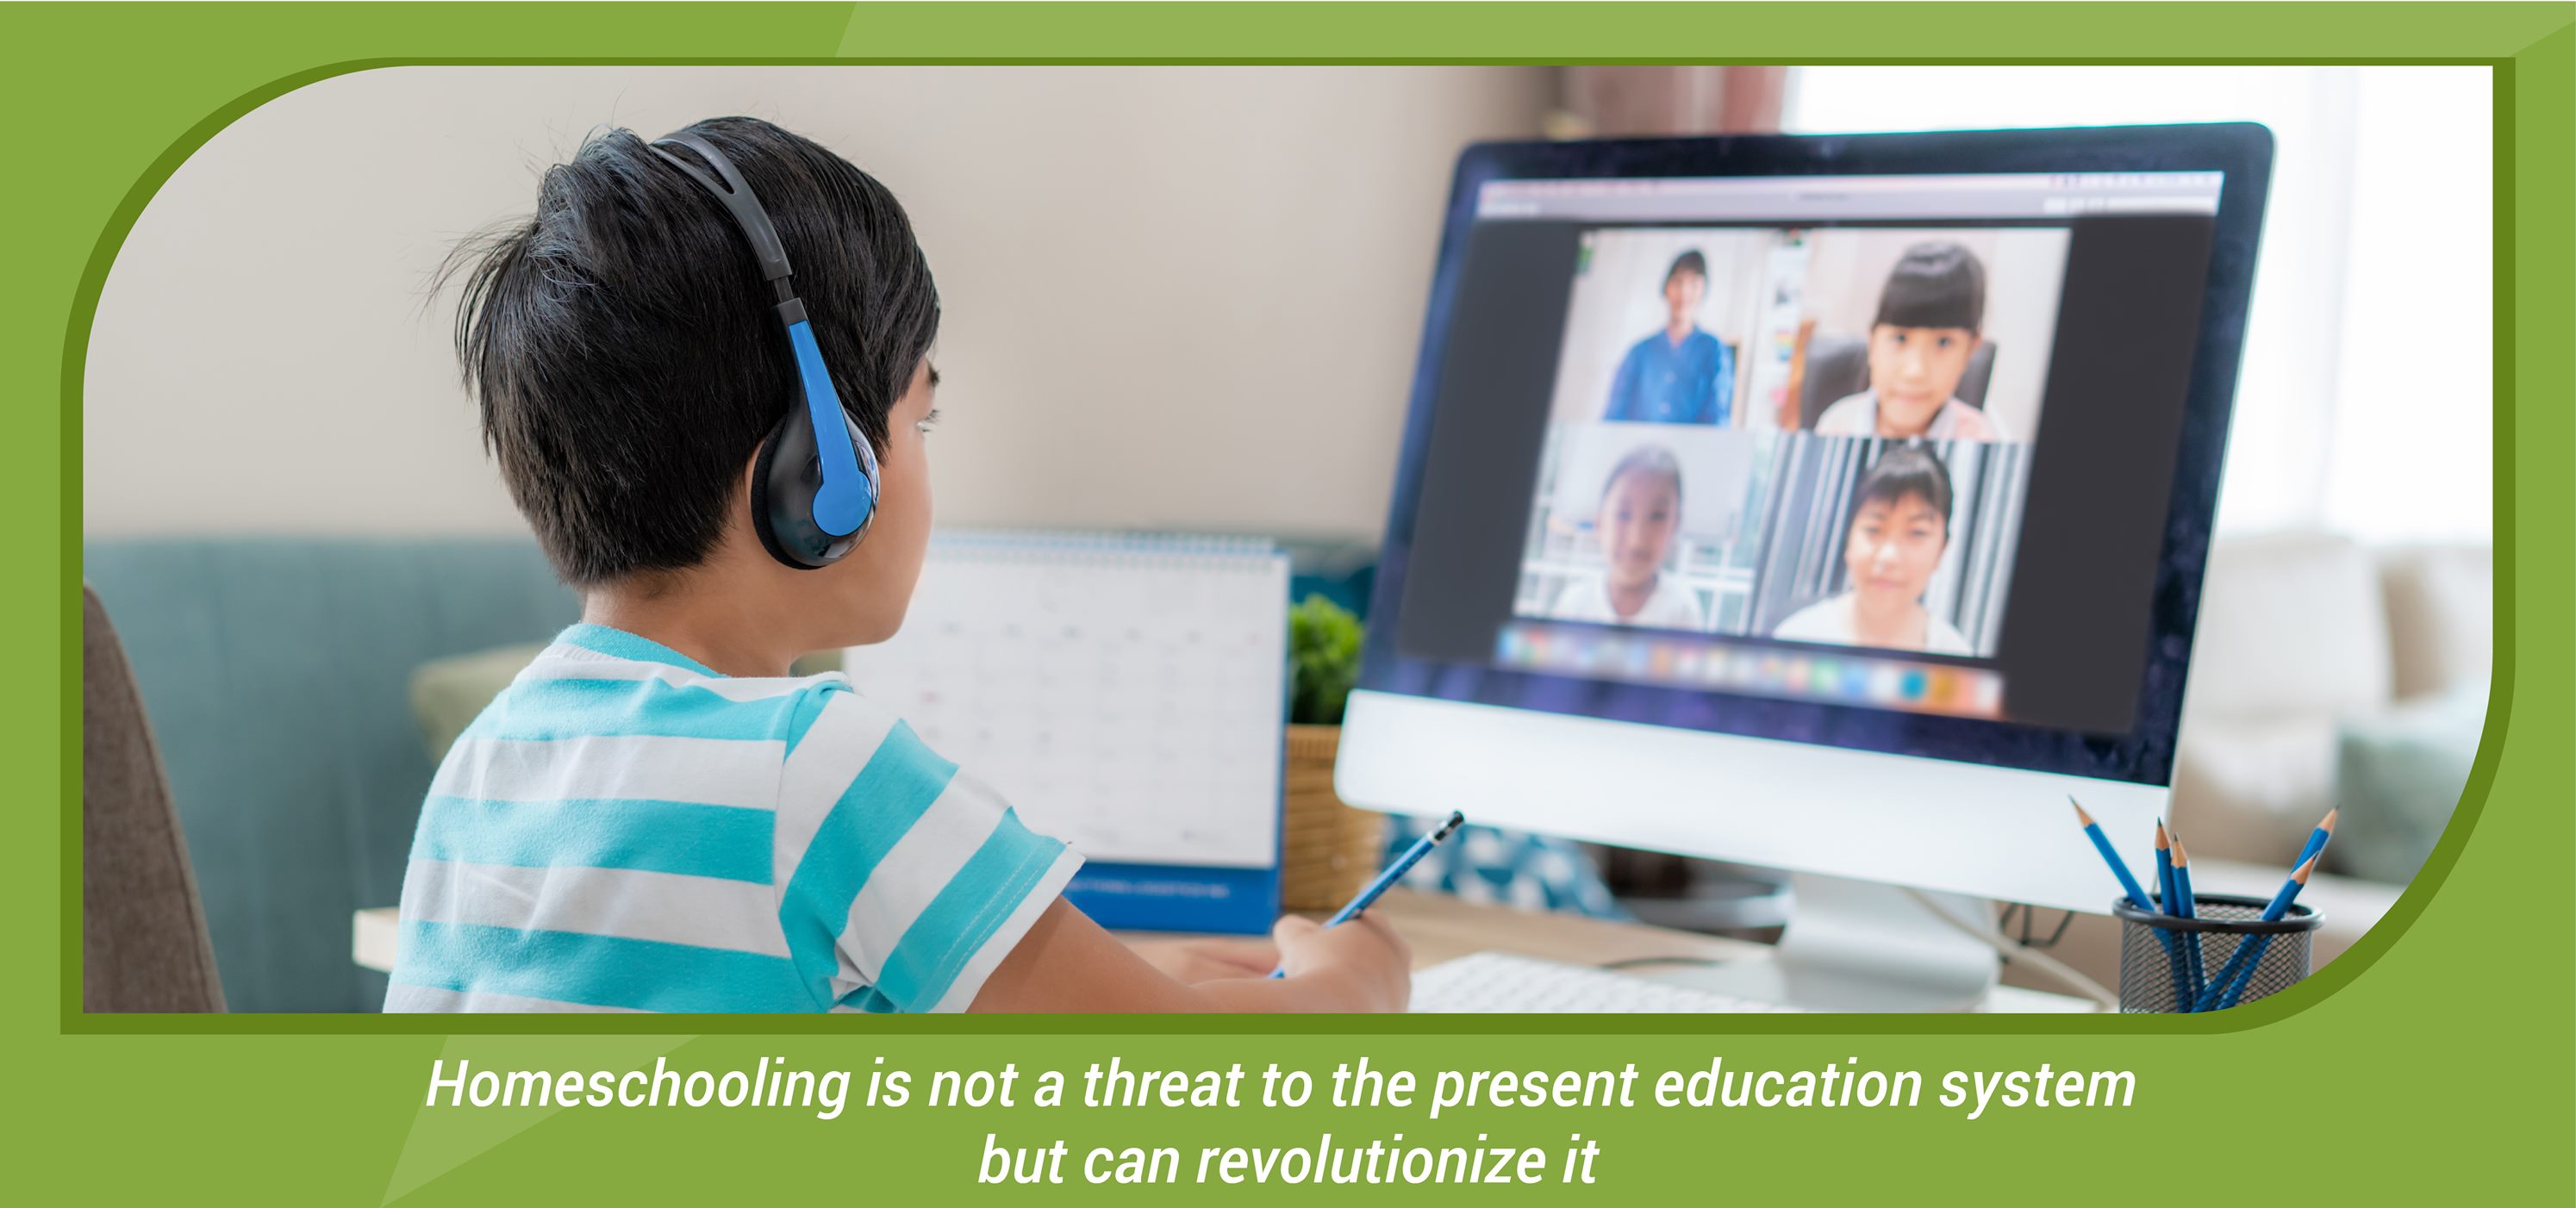 Homeschooling is not a threat to the present education system but can revolutionize it